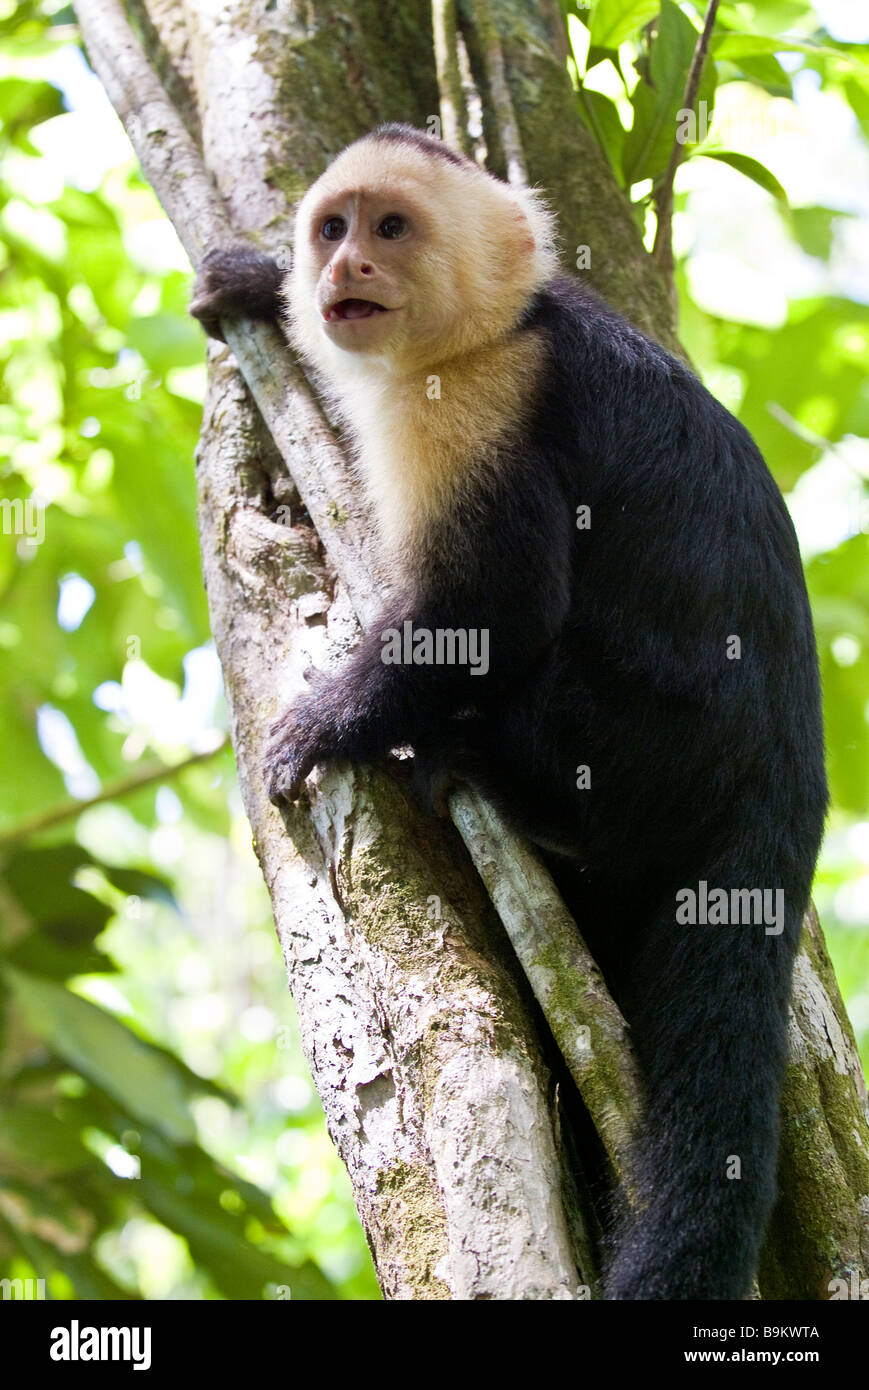 The White Faced or Capuchin Monkey of Costa Rica in a tree, Manuel Antonio National Park, Costa Rica Stock Photo